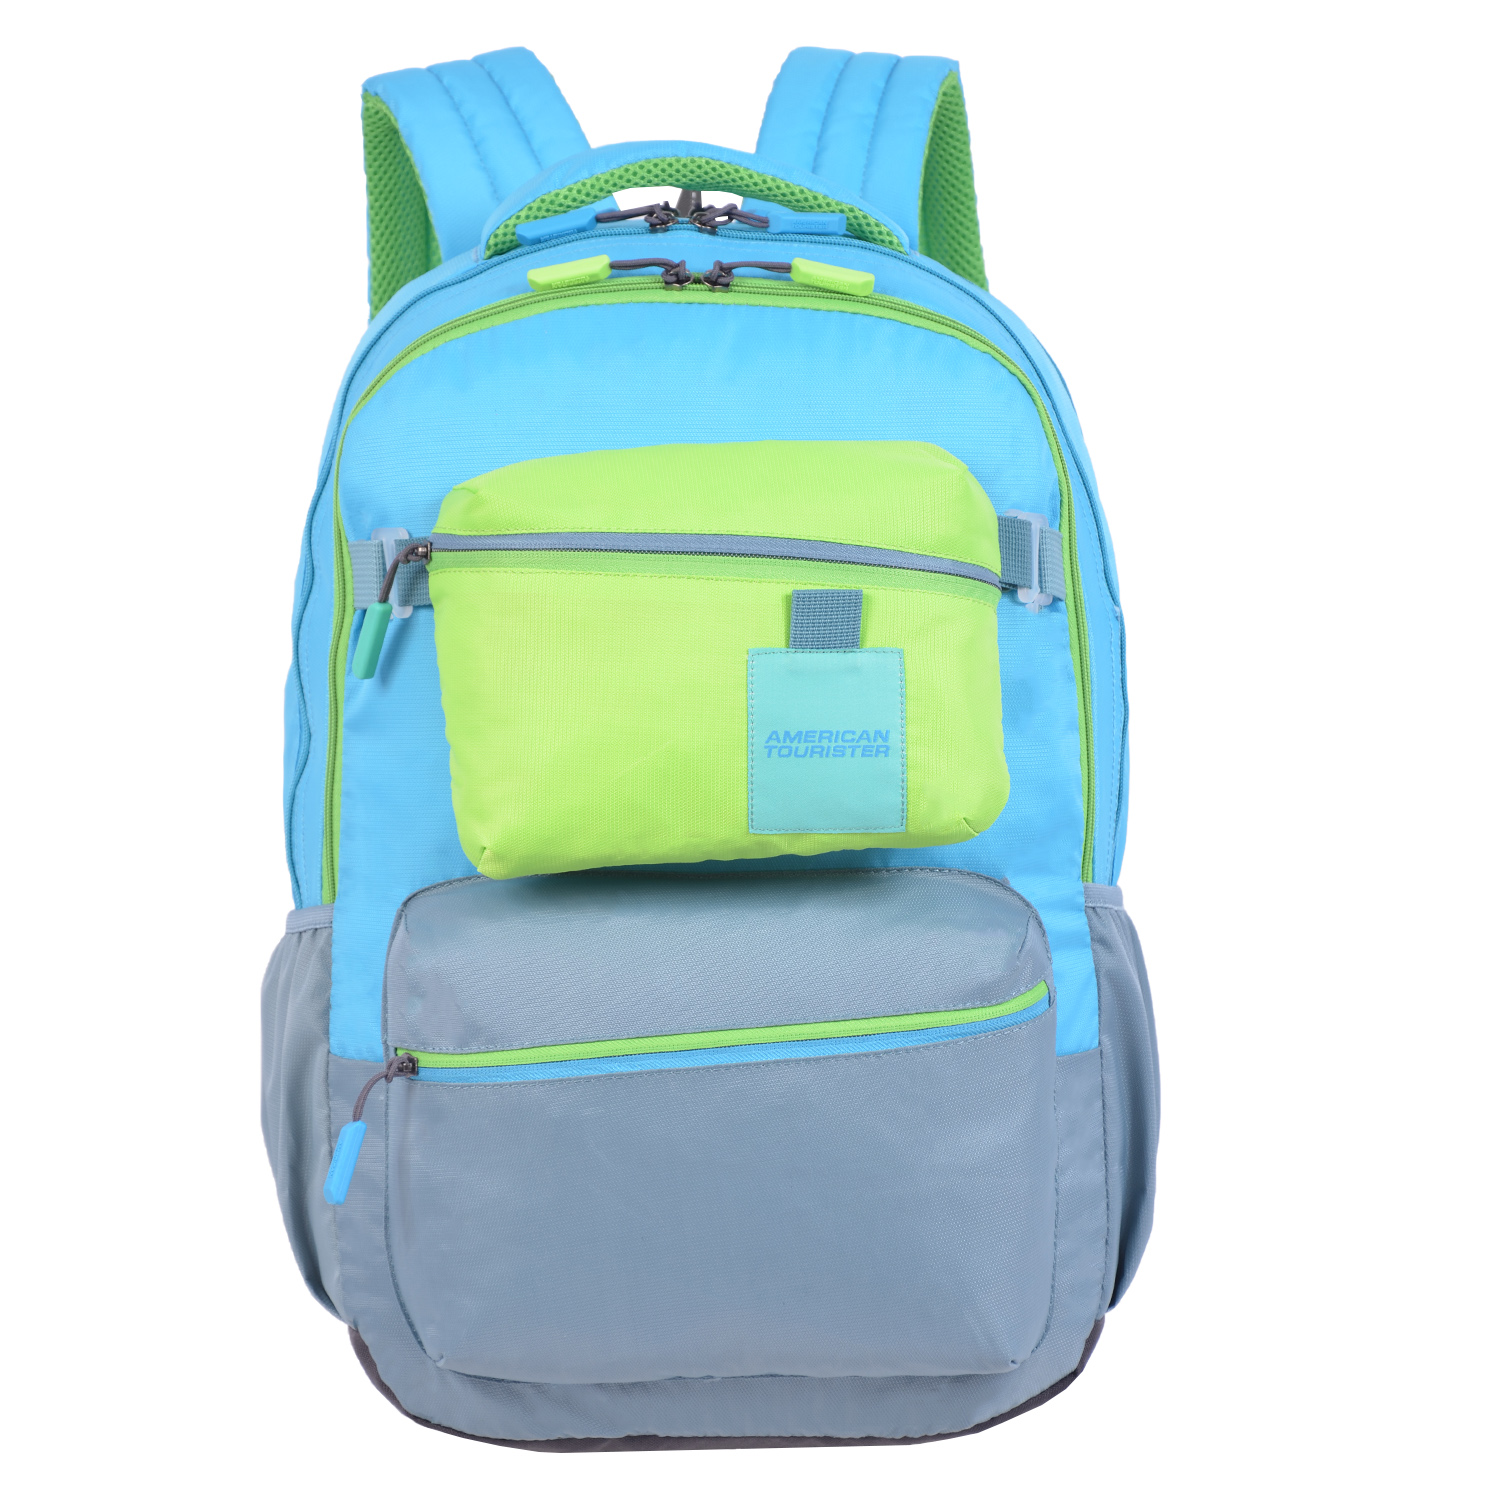 RoshanBags_AMERICAN TOURISTER 32L TOODLE CASUAL BACKPACK TURQ GREY